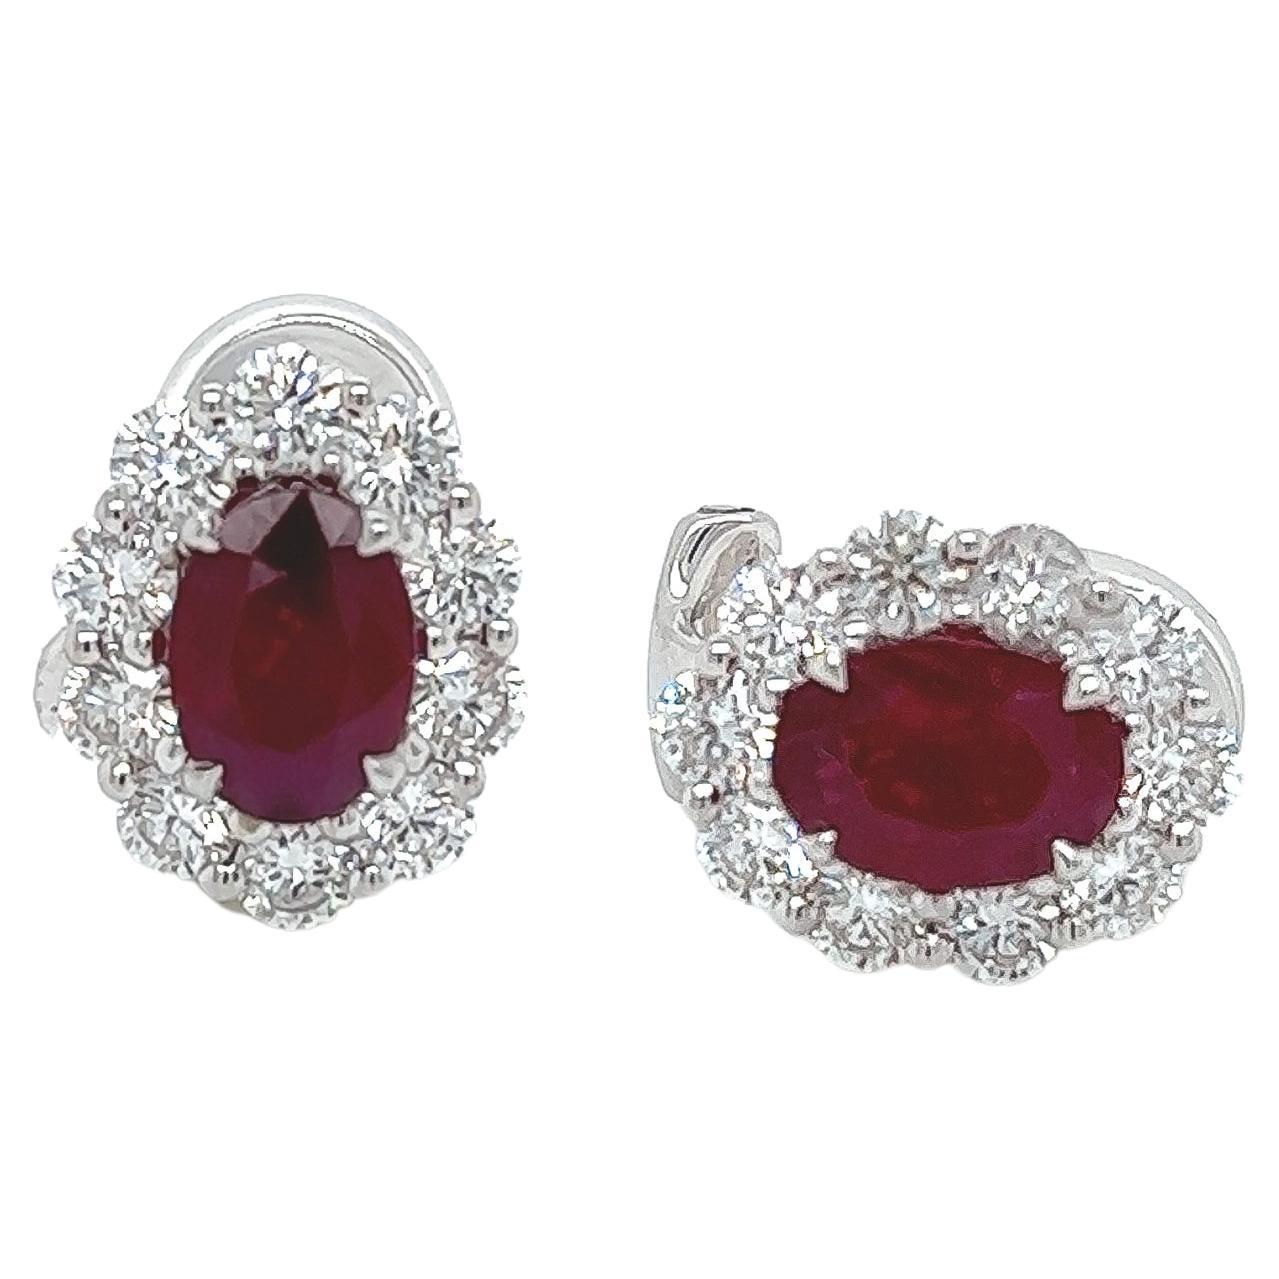 2.84 Total Carat Ruby and Diamond Earrings in 18K White Gold For Sale